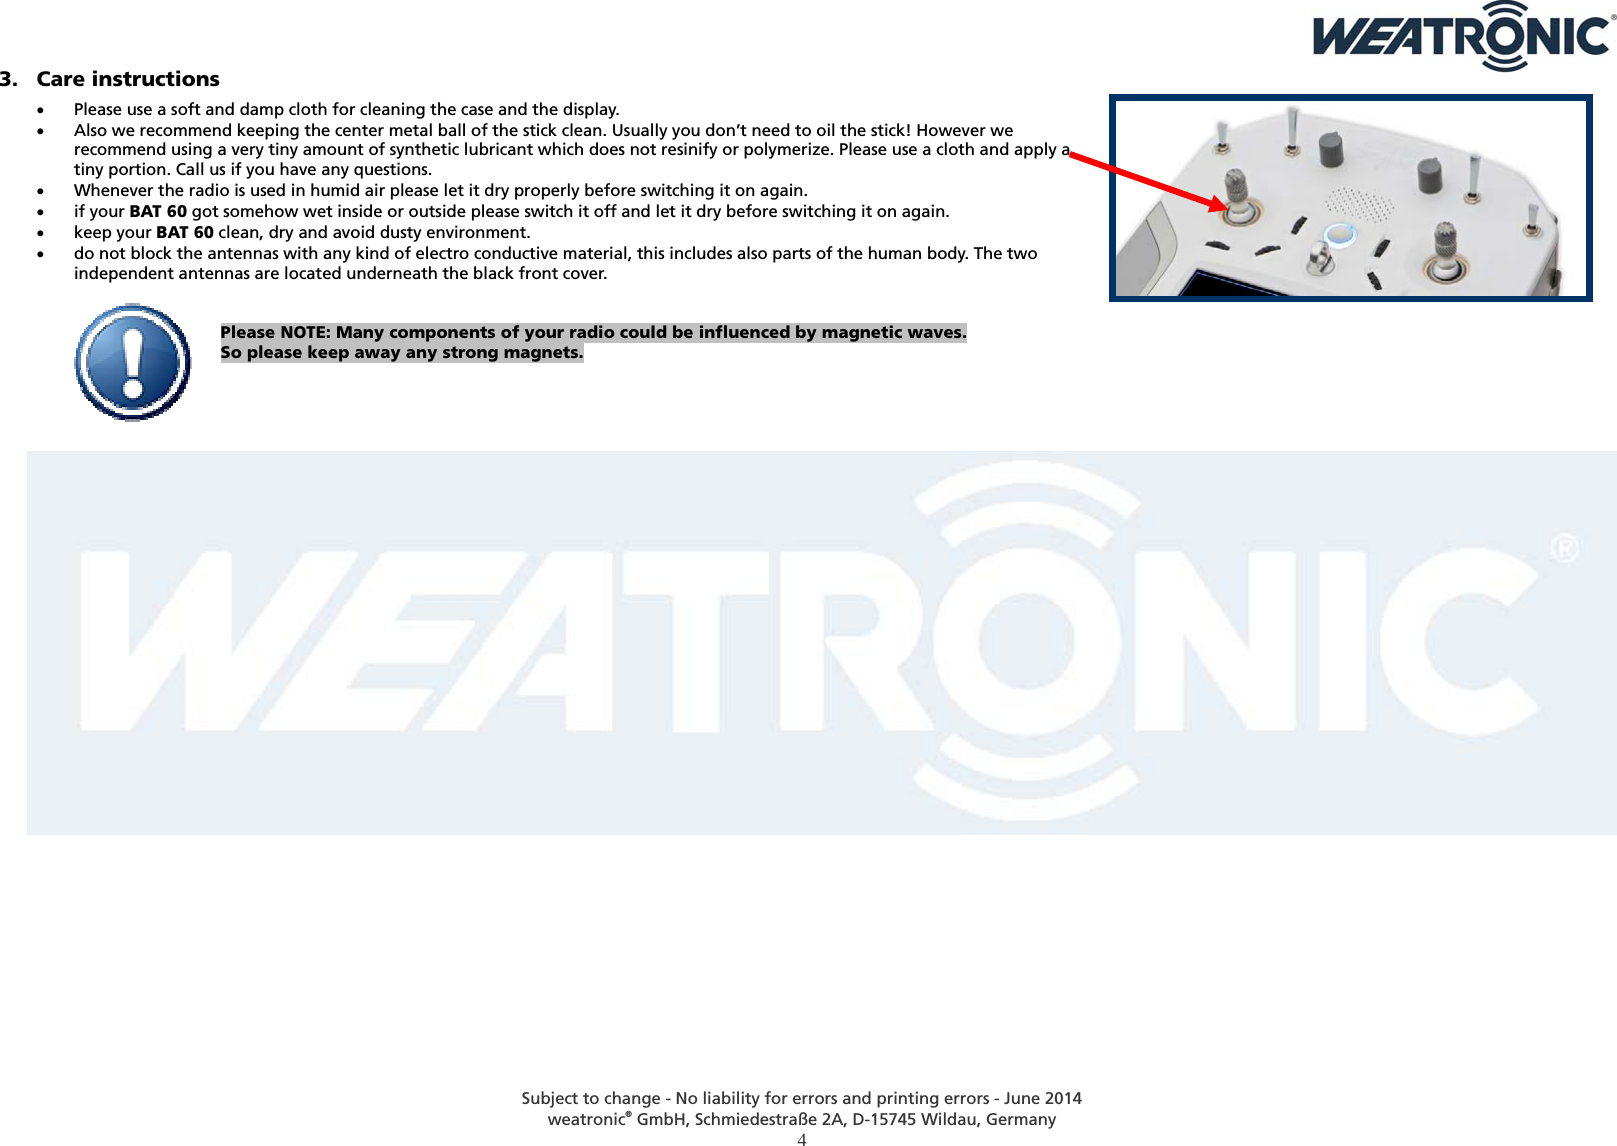  Subject to change - No liability for errors and printing errors - June 2014 weatronic® GmbH, Schmiedestraße 2A, D-15745 Wildau, Germany  4 3. Care instructions  Please use a soft and damp cloth for cleaning the case and the display.   Also we recommend keeping the center metal ball of the stick clean. Usually you don’t need to oil the stick! However we recommend using a very tiny amount of synthetic lubricant which does not resinify or polymerize. Please use a cloth and apply a tiny portion. Call us if you have any questions.  Whenever the radio is used in humid air please let it dry properly before switching it on again.  if your BAT 60 got somehow wet inside or outside please switch it off and let it dry before switching it on again.  keep your BAT 60 clean, dry and avoid dusty environment.  do not block the antennas with any kind of electro conductive material, this includes also parts of the human body. The two independent antennas are located underneath the black front cover.   Please NOTE: Many components of your radio could be influenced by magnetic waves. So please keep away any strong magnets.    